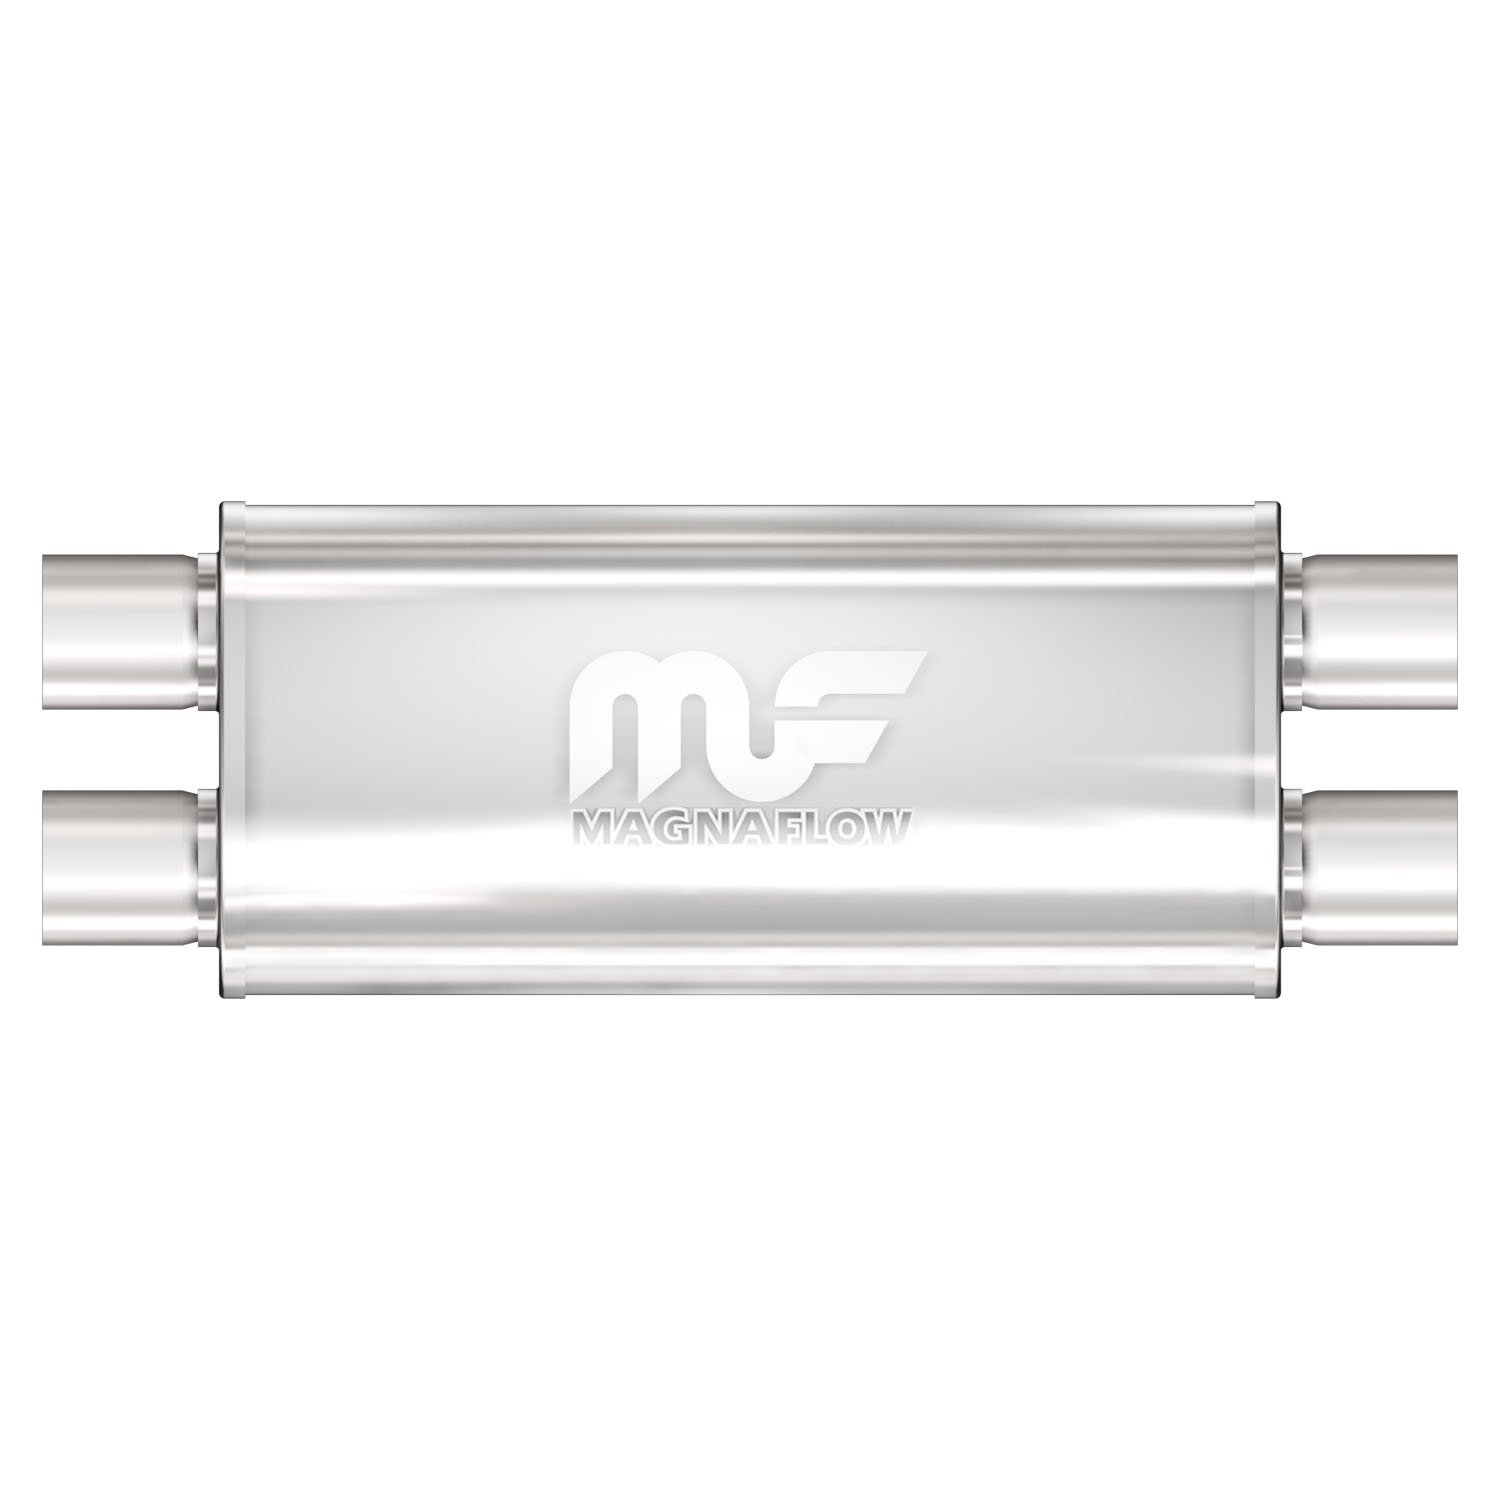 5" x 8" Oval Muffler, Dual In/Dual Out: 2.5", Body Length: 18", Overall Length: 24", Core Size: 2.5" [Brushed Finish]